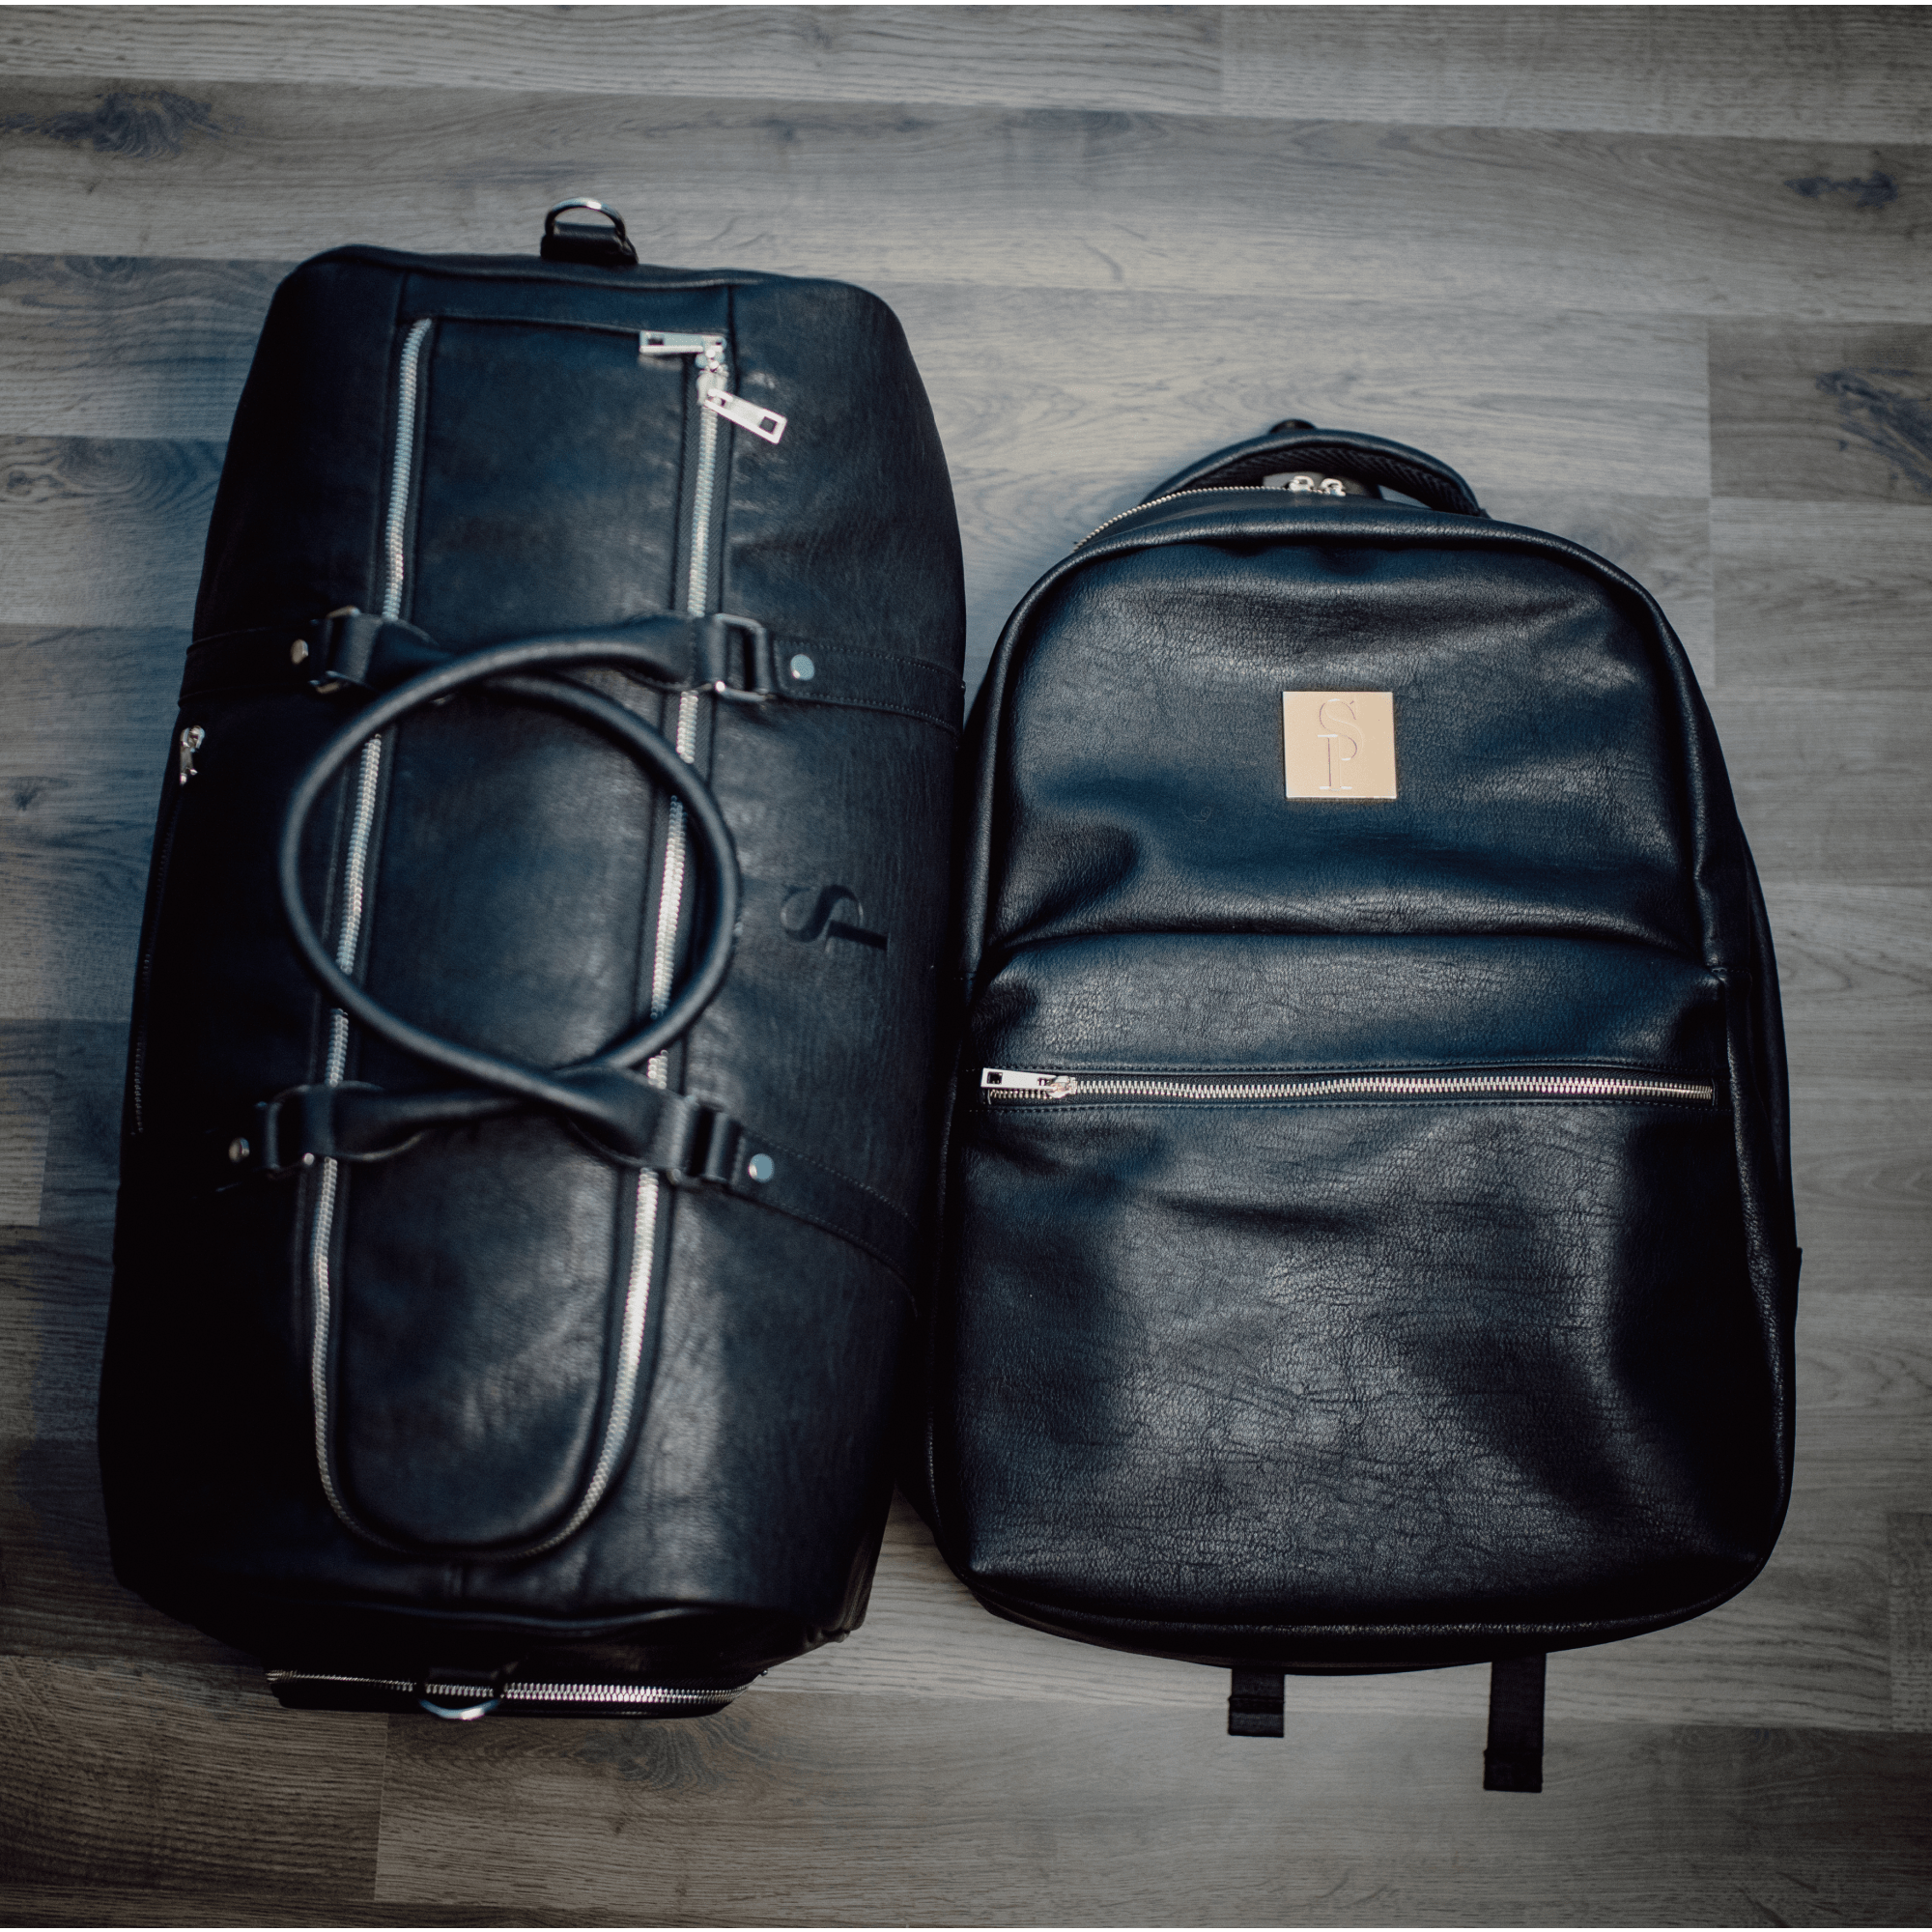 Work & Play Duo - Leather Backpack set in Racing Green & Midnight